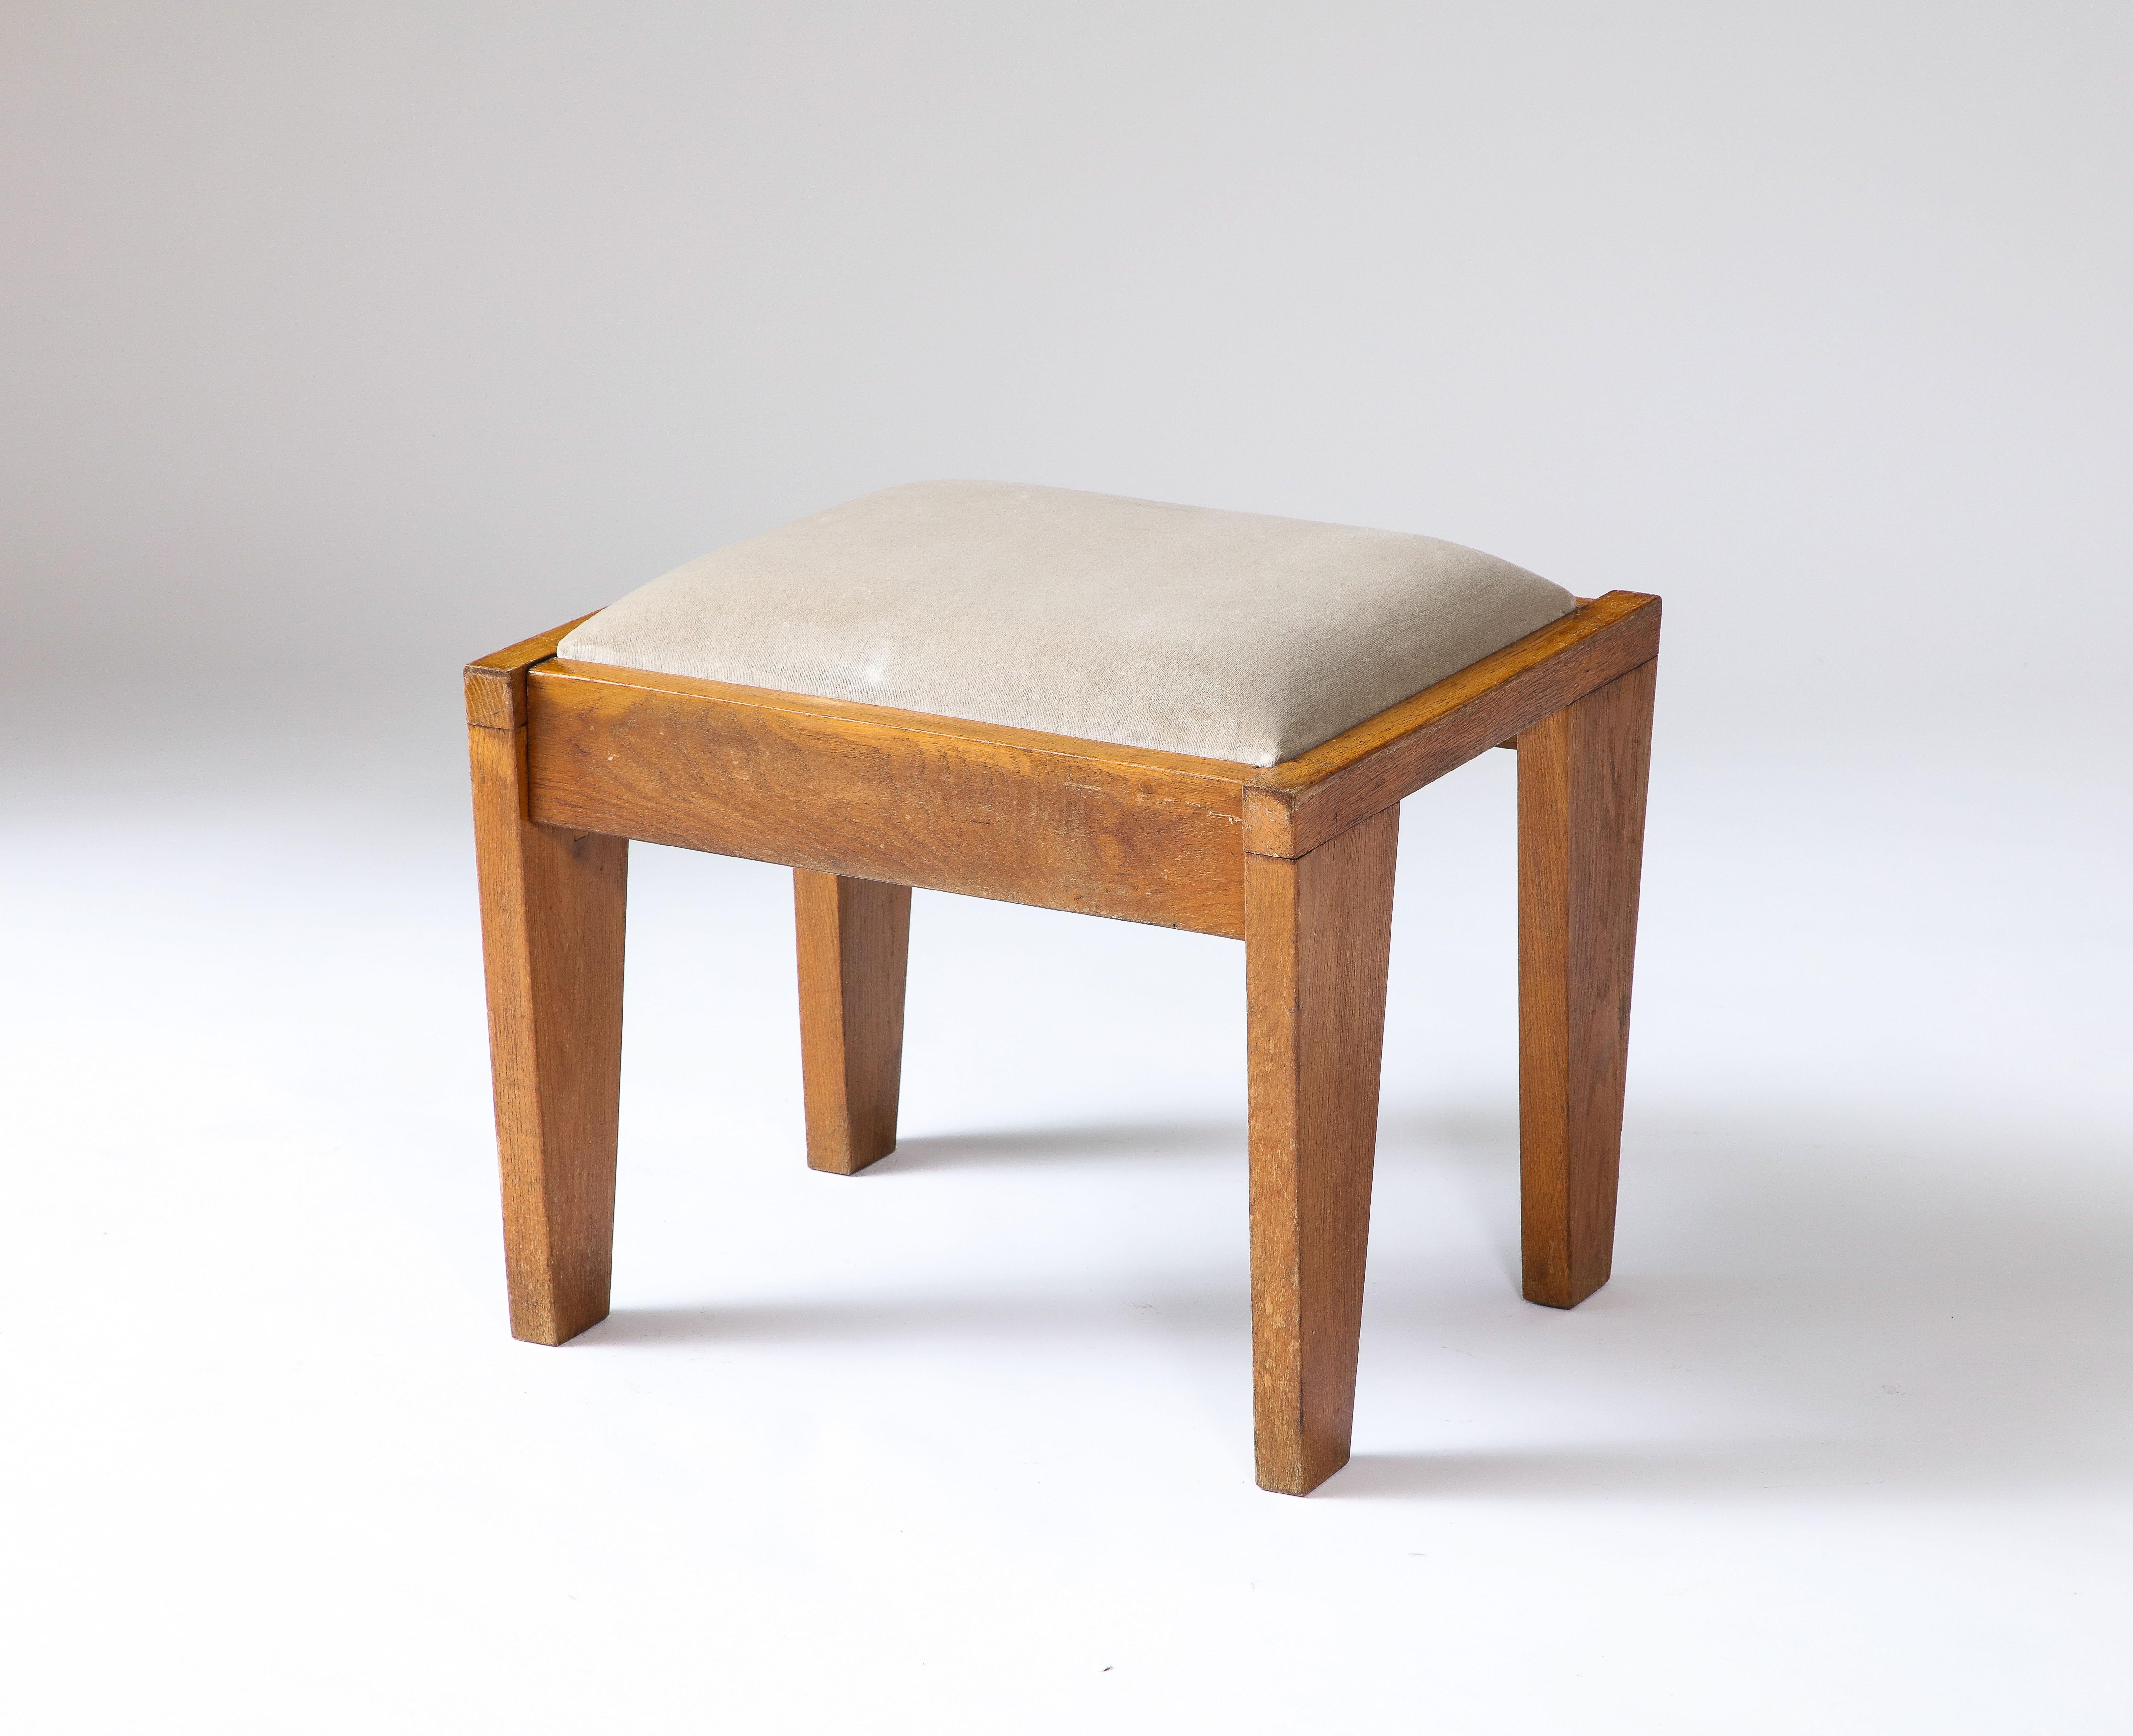 Two available; priced individually.

Large, angular stool made of beautifully patinated oak.